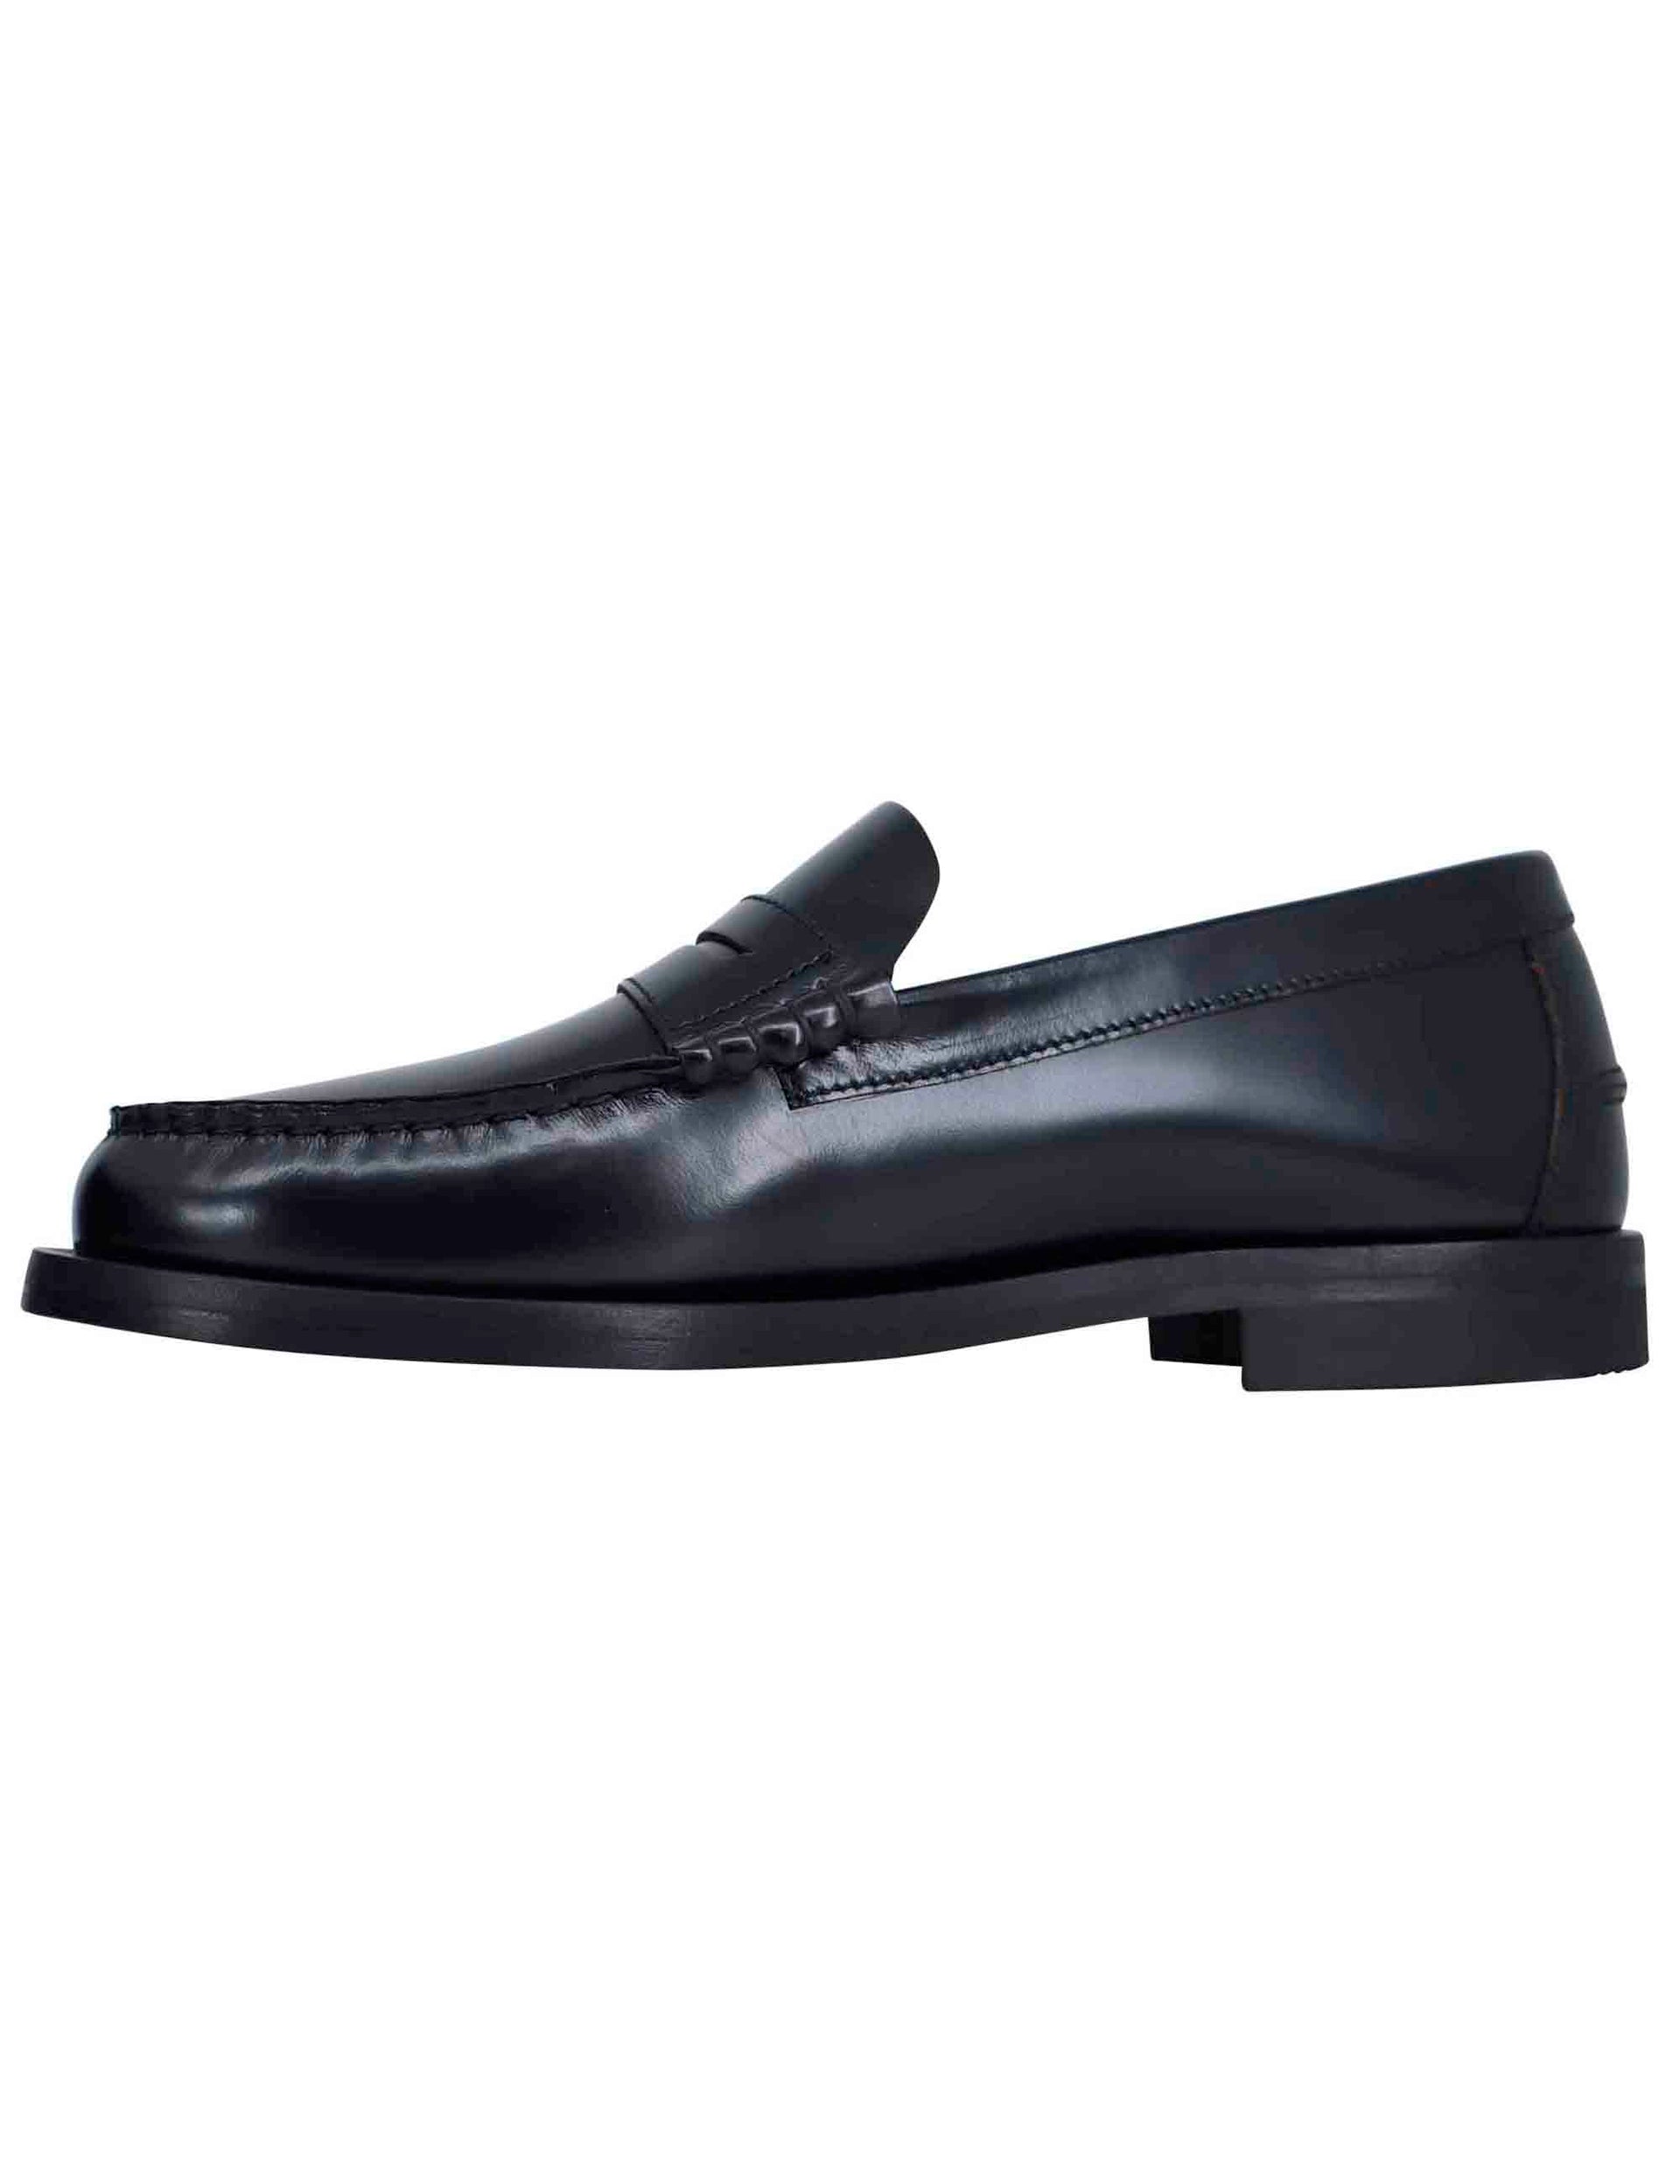 Men's black leather moccasins with stitched leather sole